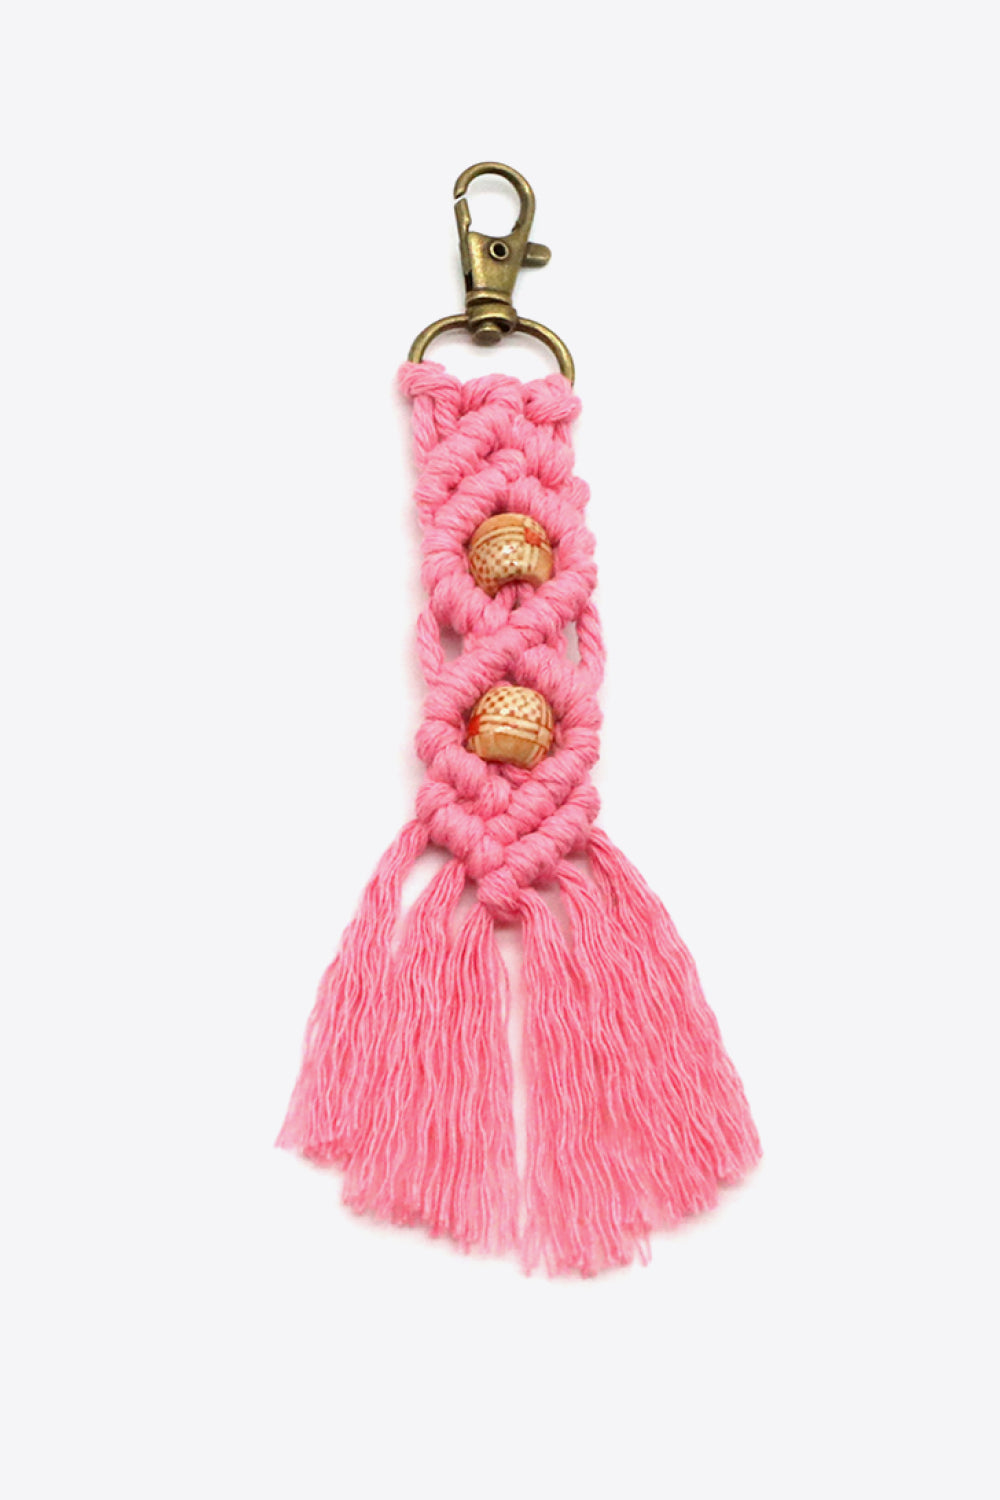 Trendsi Cupid Beauty Supplies Rouge Pink / One Size Keychains Assorted 4-Pack Handmade Macrame Fringe Keychain